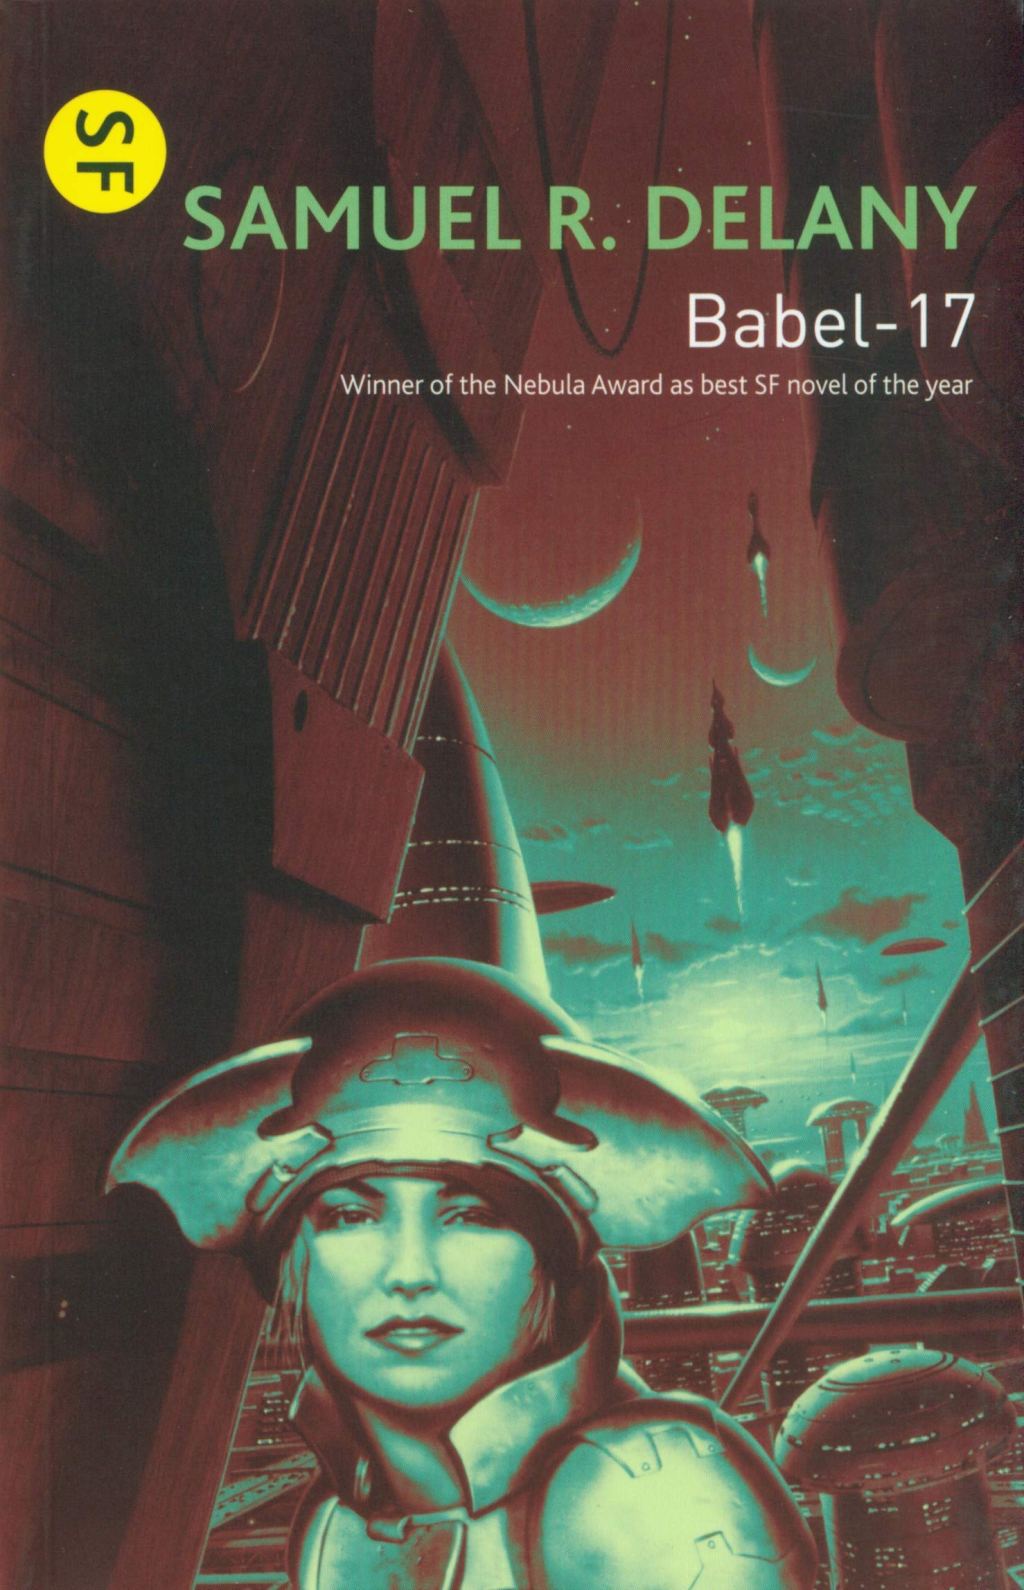 BOOK REVIEW: Babel-17, by Samuel R. Delany